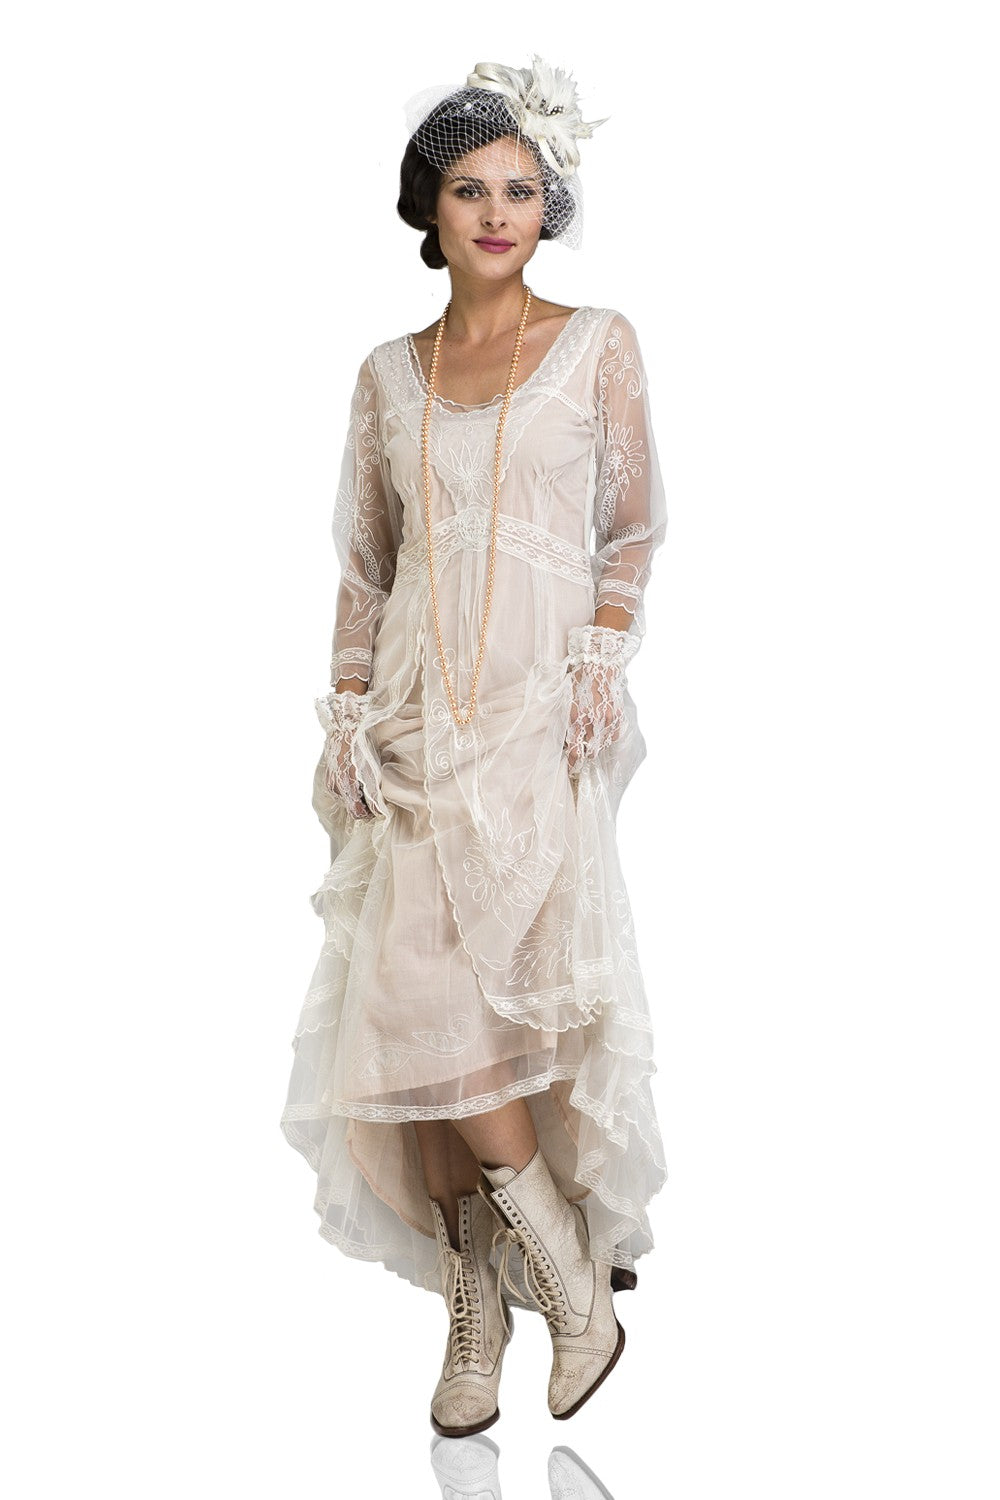 Victorian Wedding Dresses, Shoes, Accessories Downton Abbey Tea Party Gown in Ivory by Nataya $275.00 AT vintagedancer.com